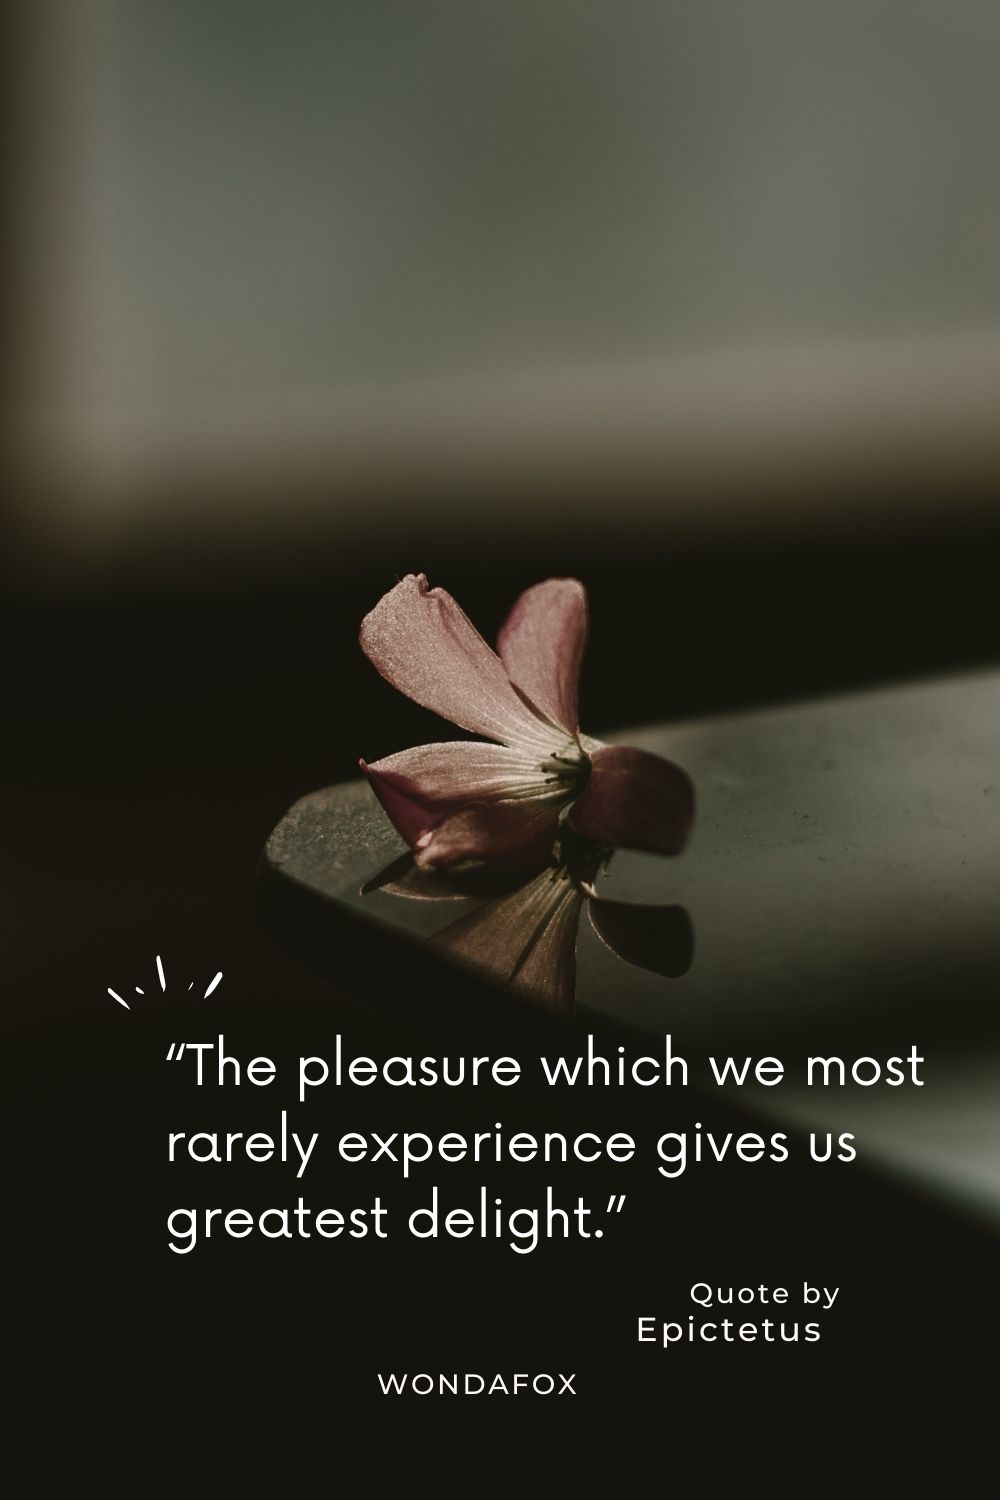 “The pleasure which we most rarely experience gives us greatest delight.”